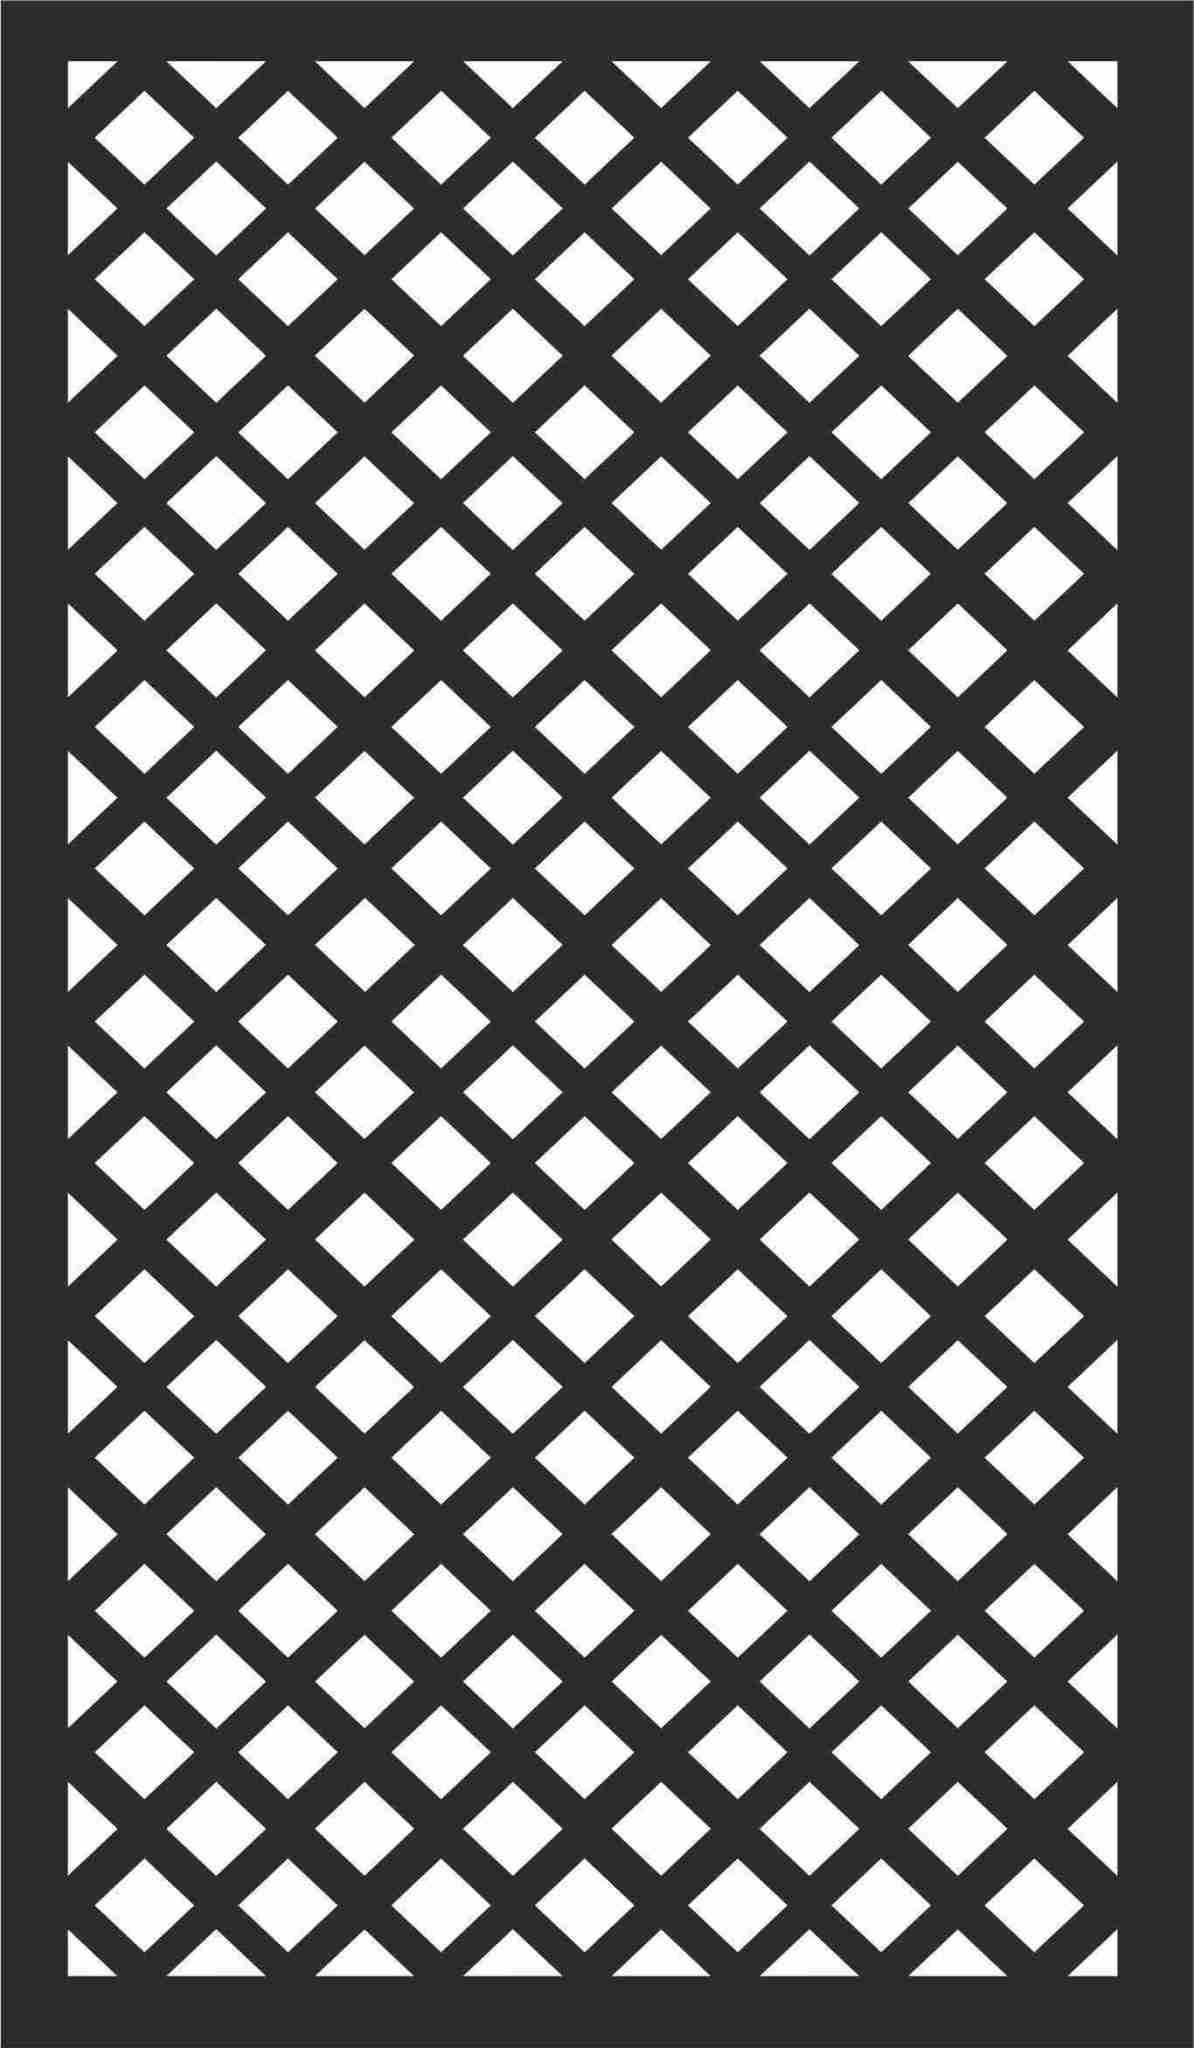 Decorative Screen Patterns For Laser Cutting 108 Free DXF File